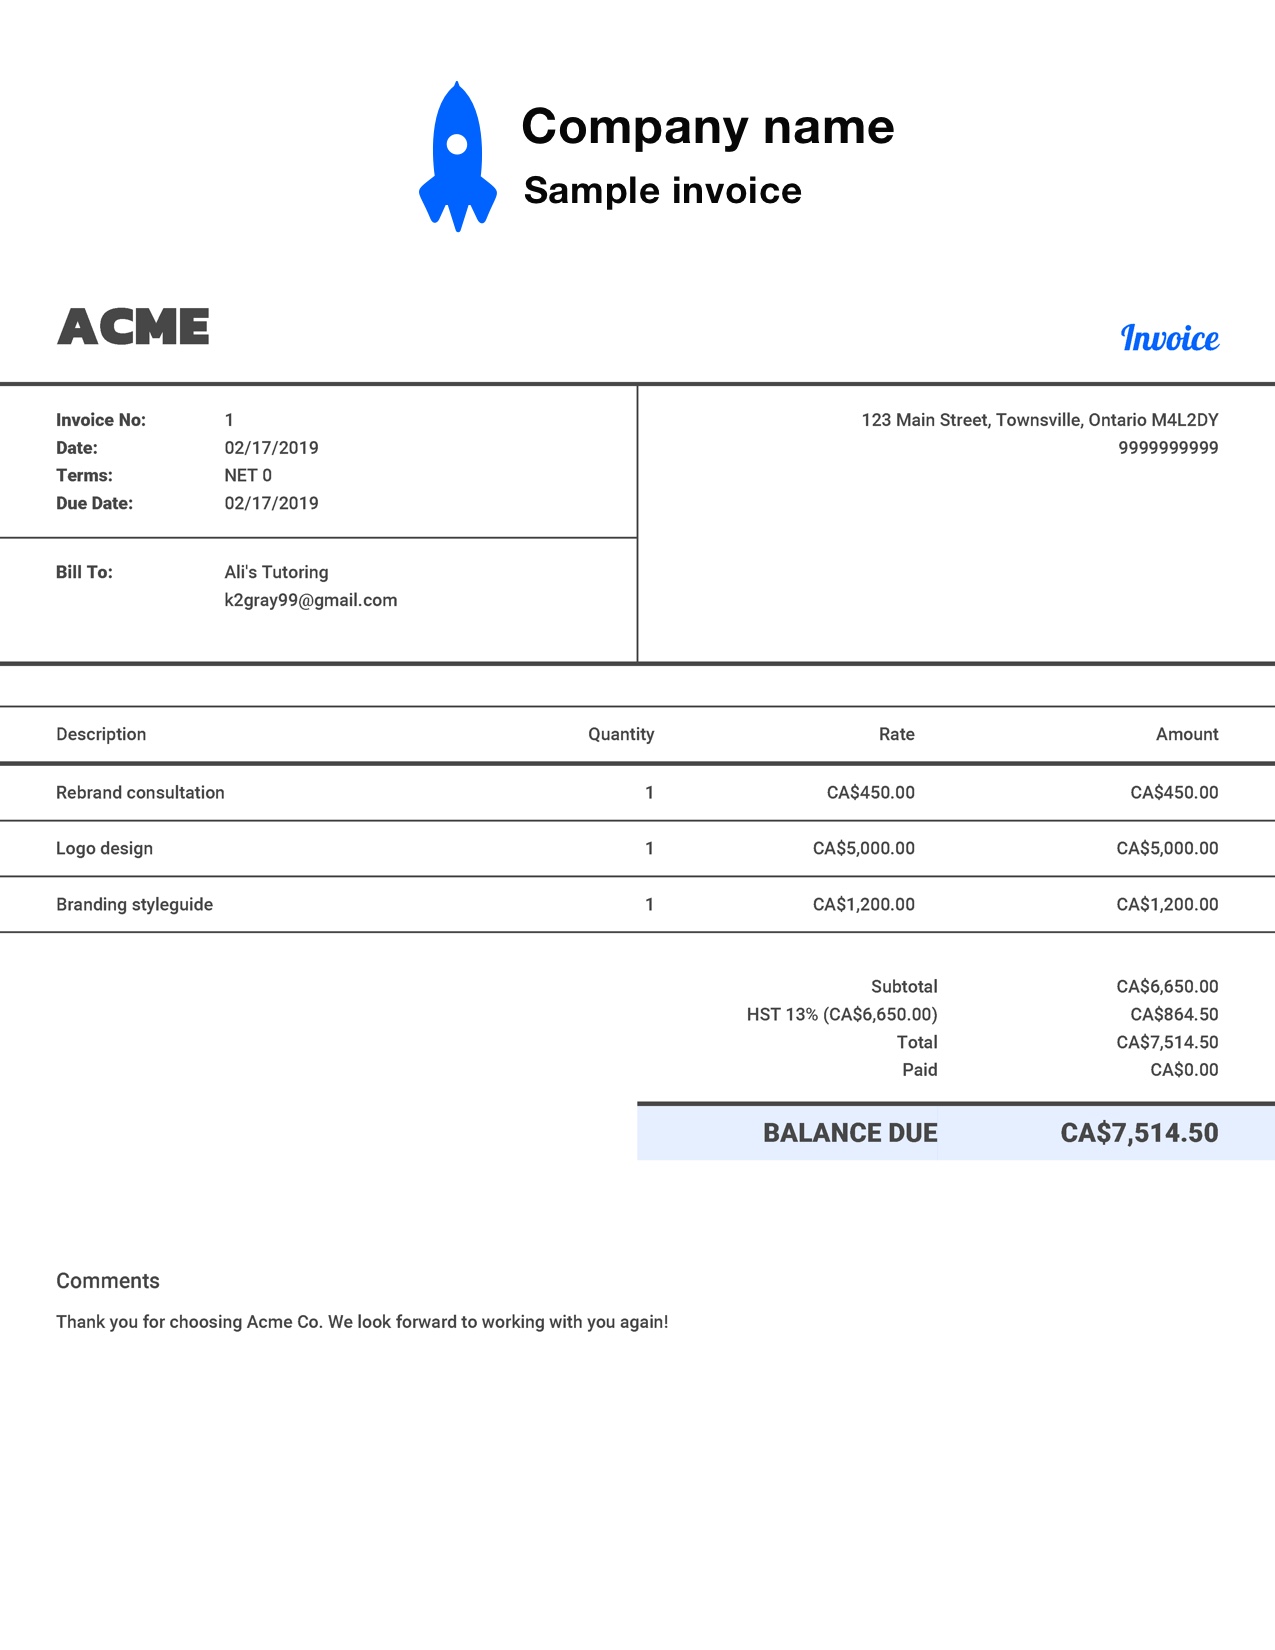 Free Sample Invoice Template. Customize and Send in 90 Seconds